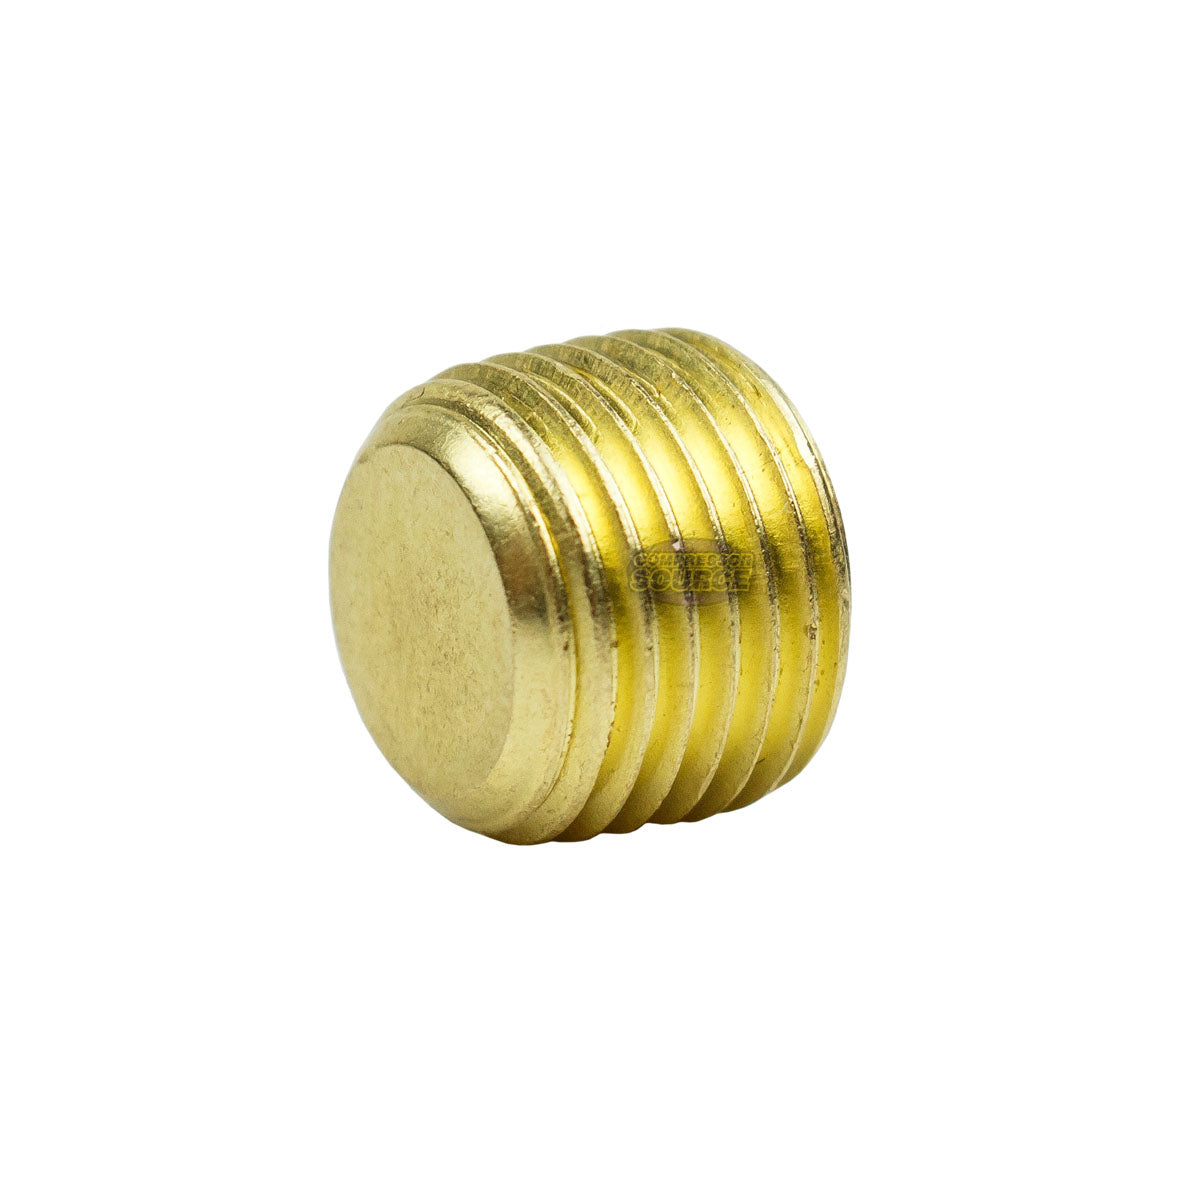 1/8" Pipe Plug Countersunk Hex Head Style Male NPT Brass Pipe End Fitting Cap